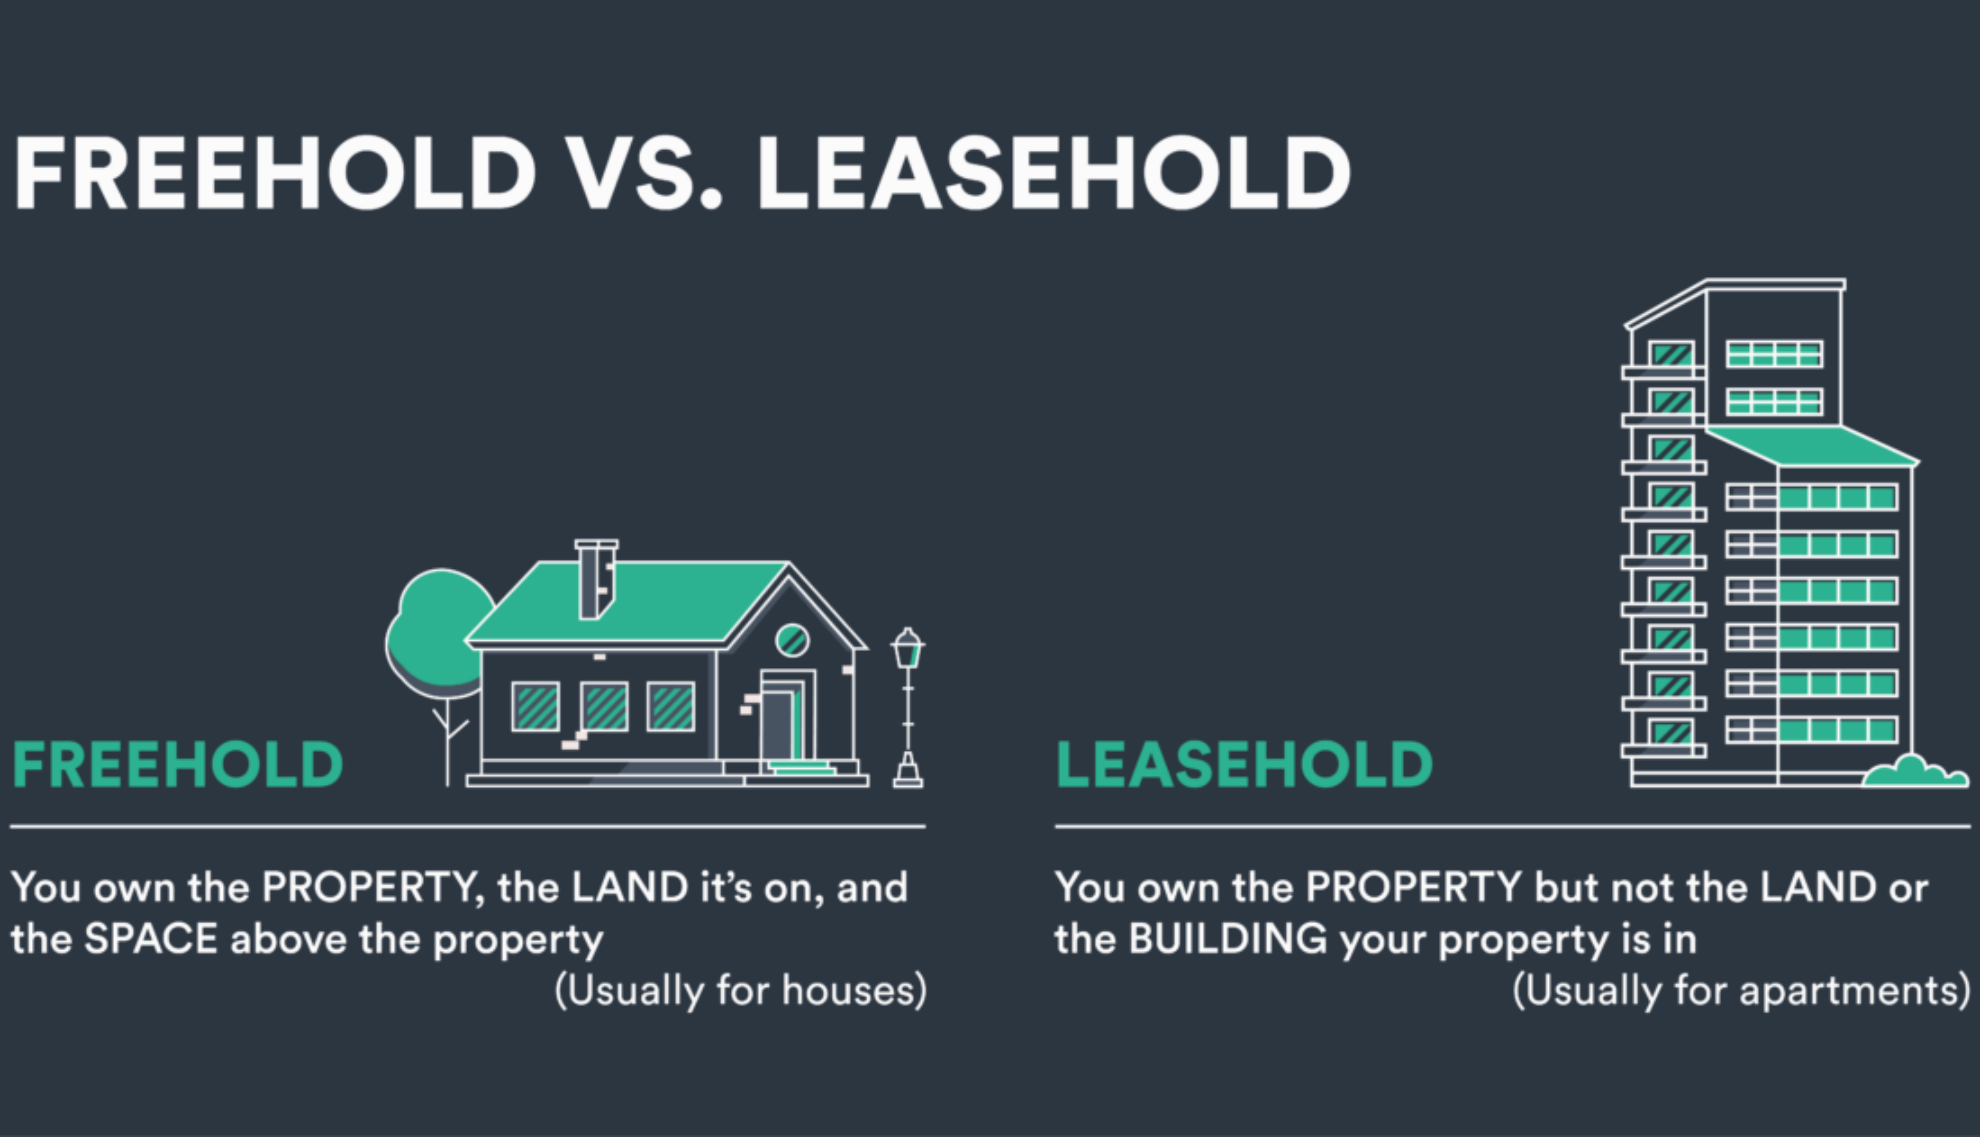 Freehold vs. leasehold infographic